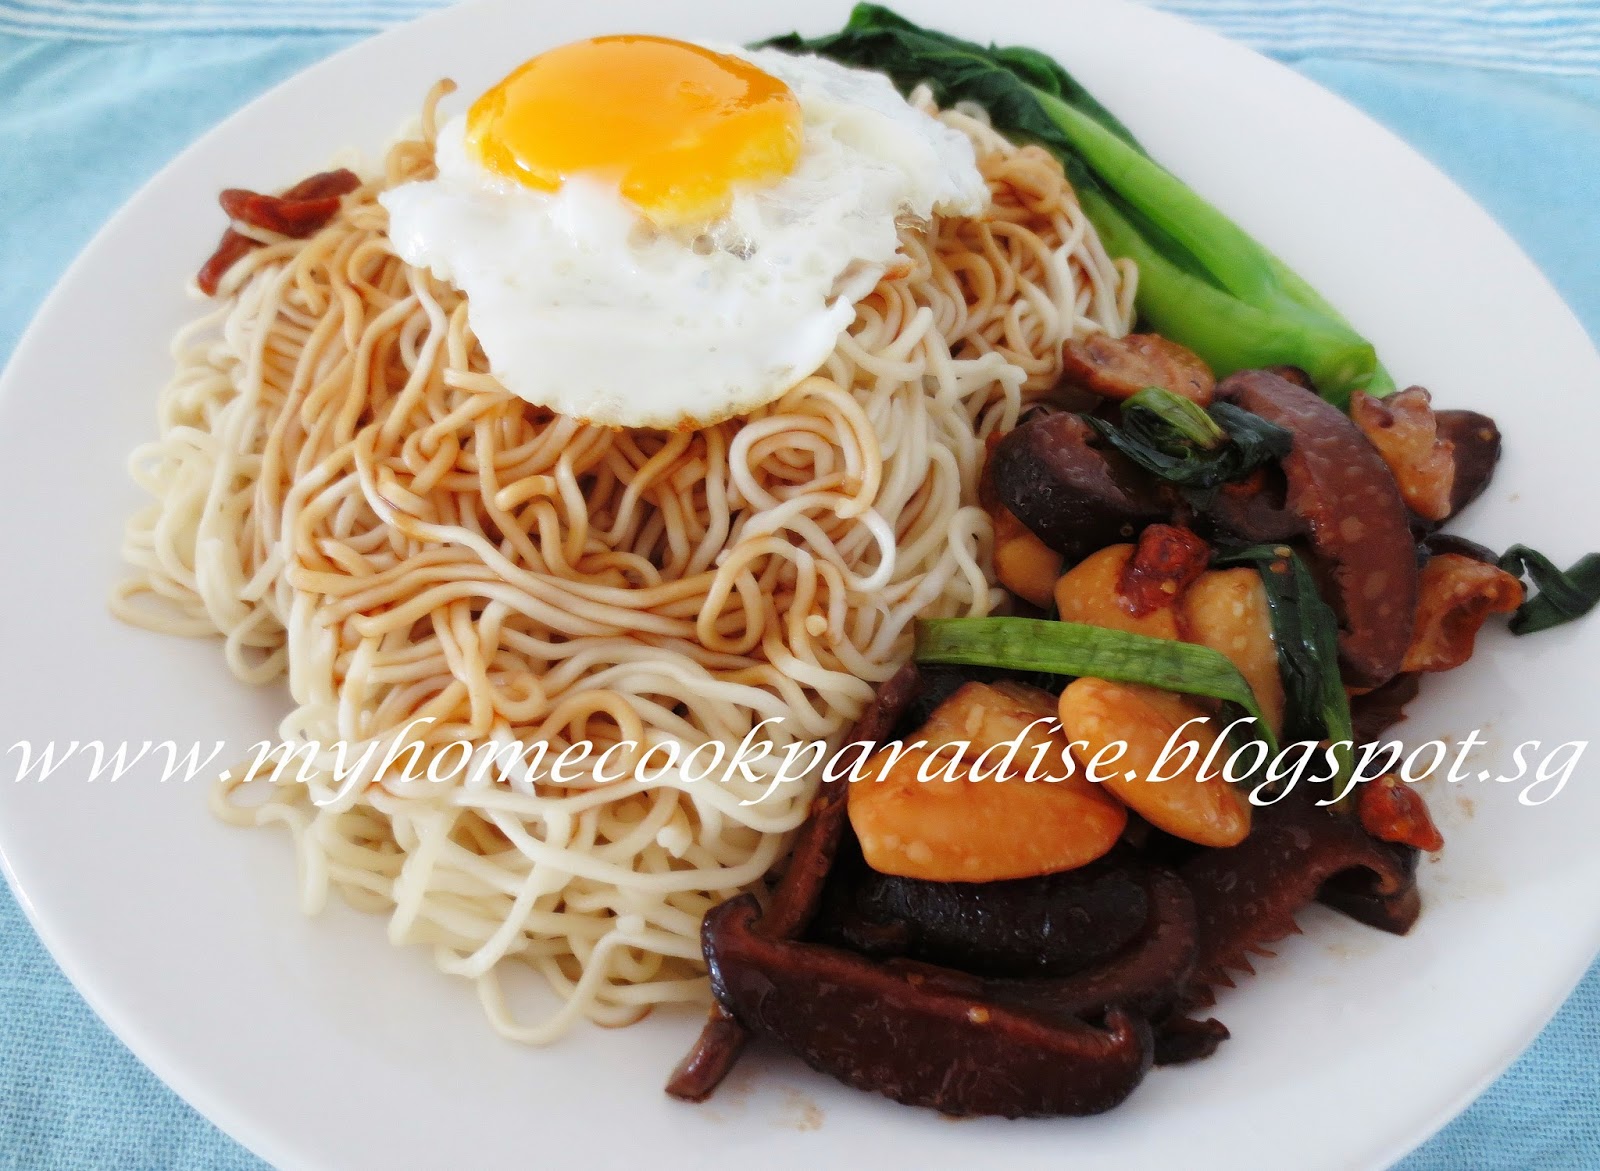 http://myhomecookparadise.blogspot.sg/2014/06/noodles-with-stir-fry-clams-shiitake.html